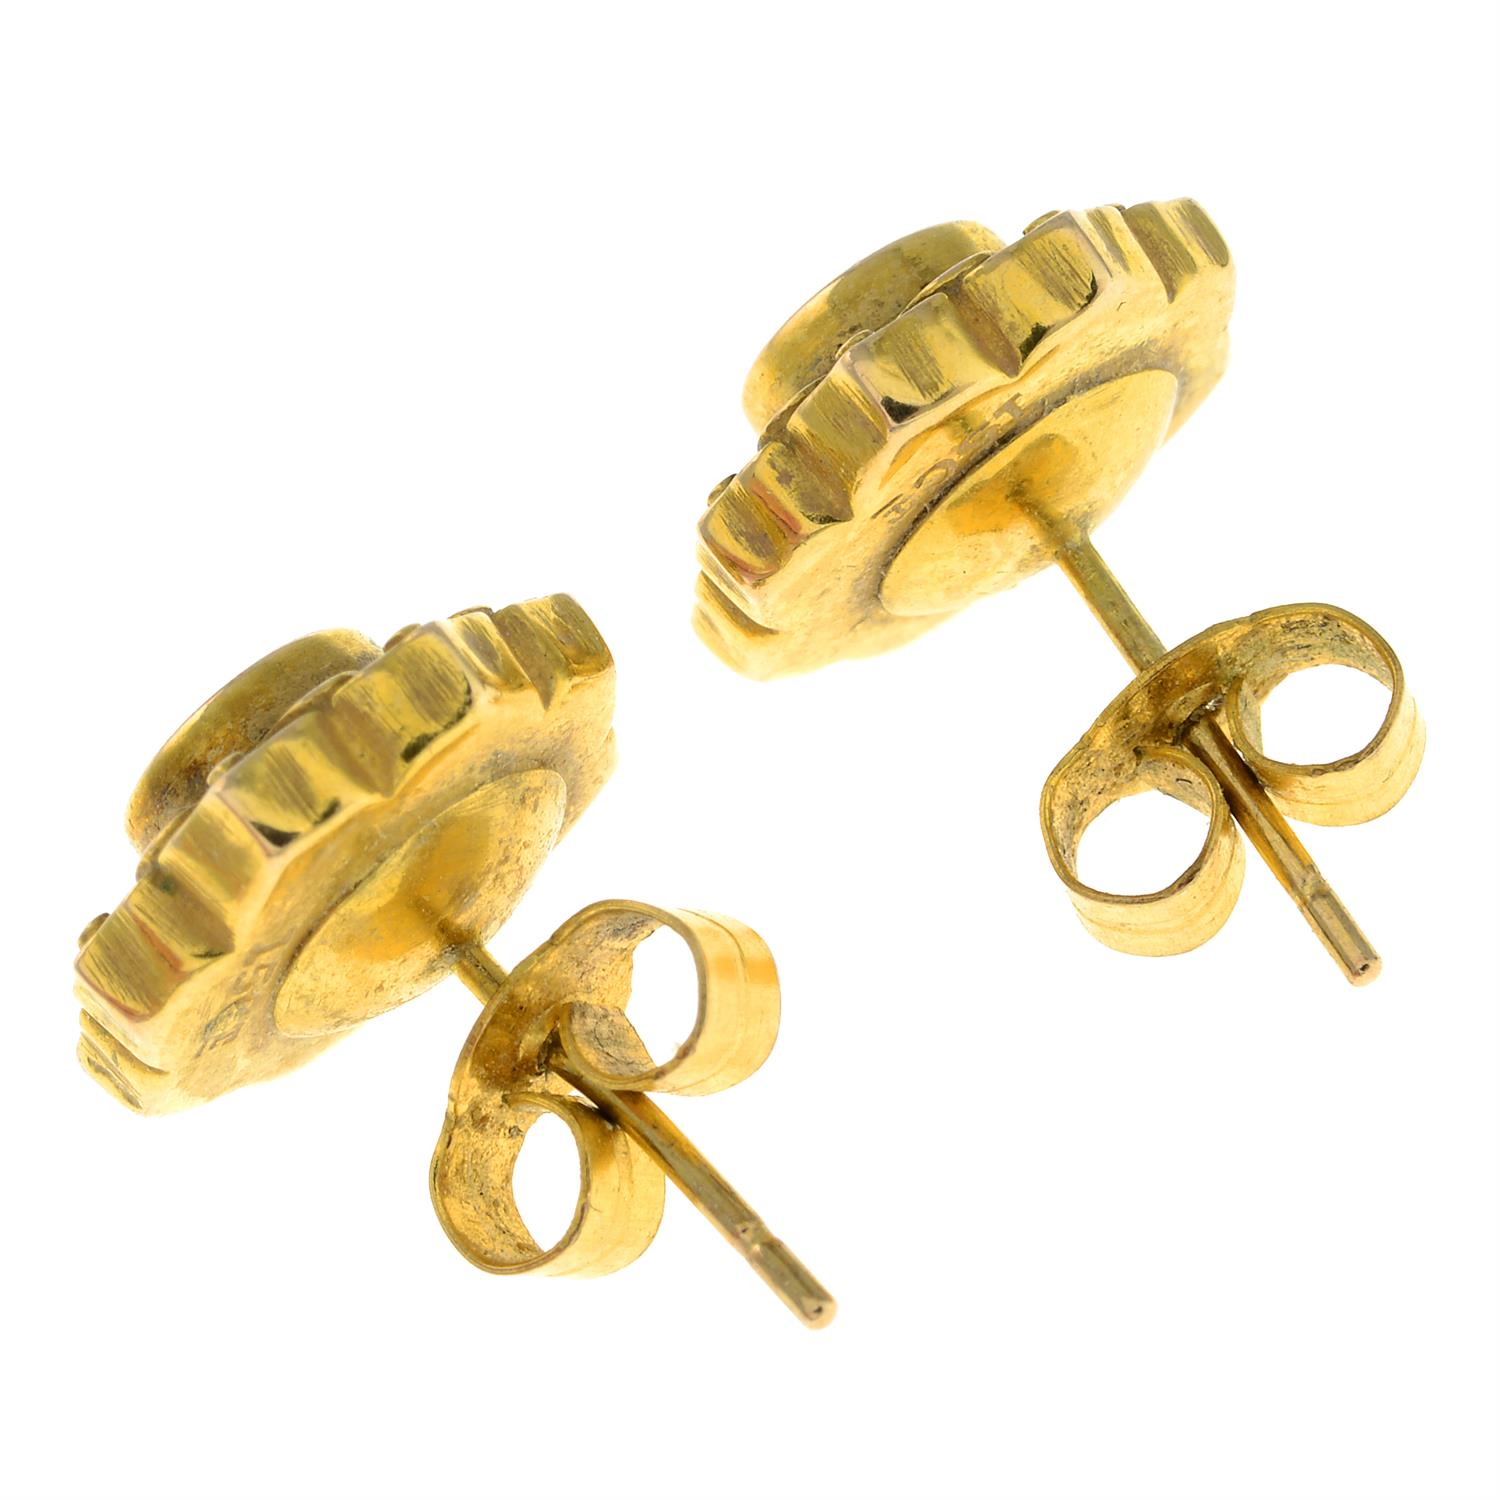 A pair of late 19th century 15ct gold stud earrings, with diamond point highlights. - Image 2 of 2